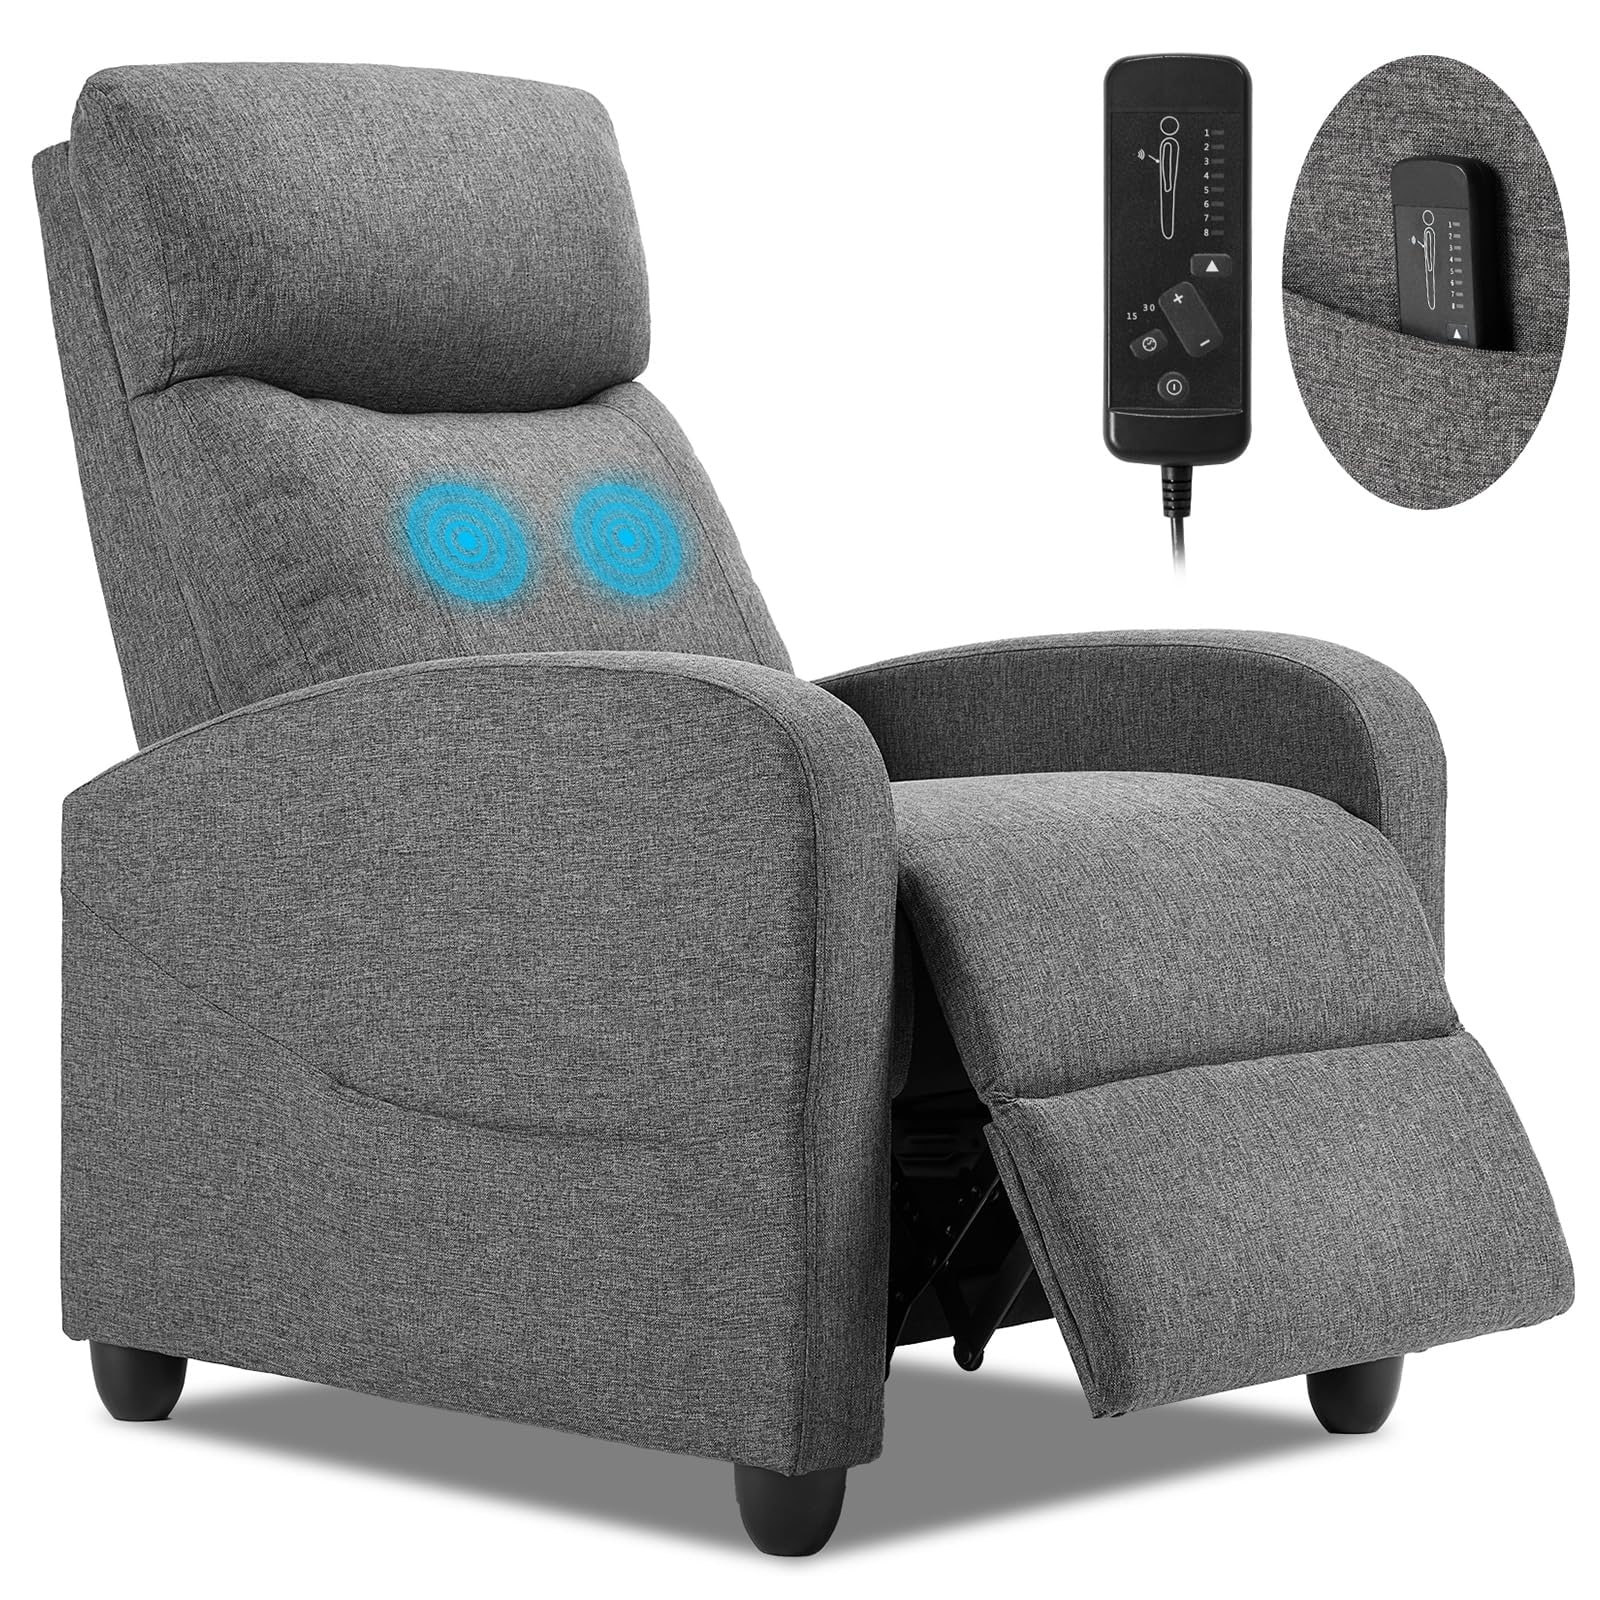 Recliner Chair For Living Room  Massage Pu Leather Recliner Sofa Home Theater Seating With Lumbar Support Winback Single Sofa